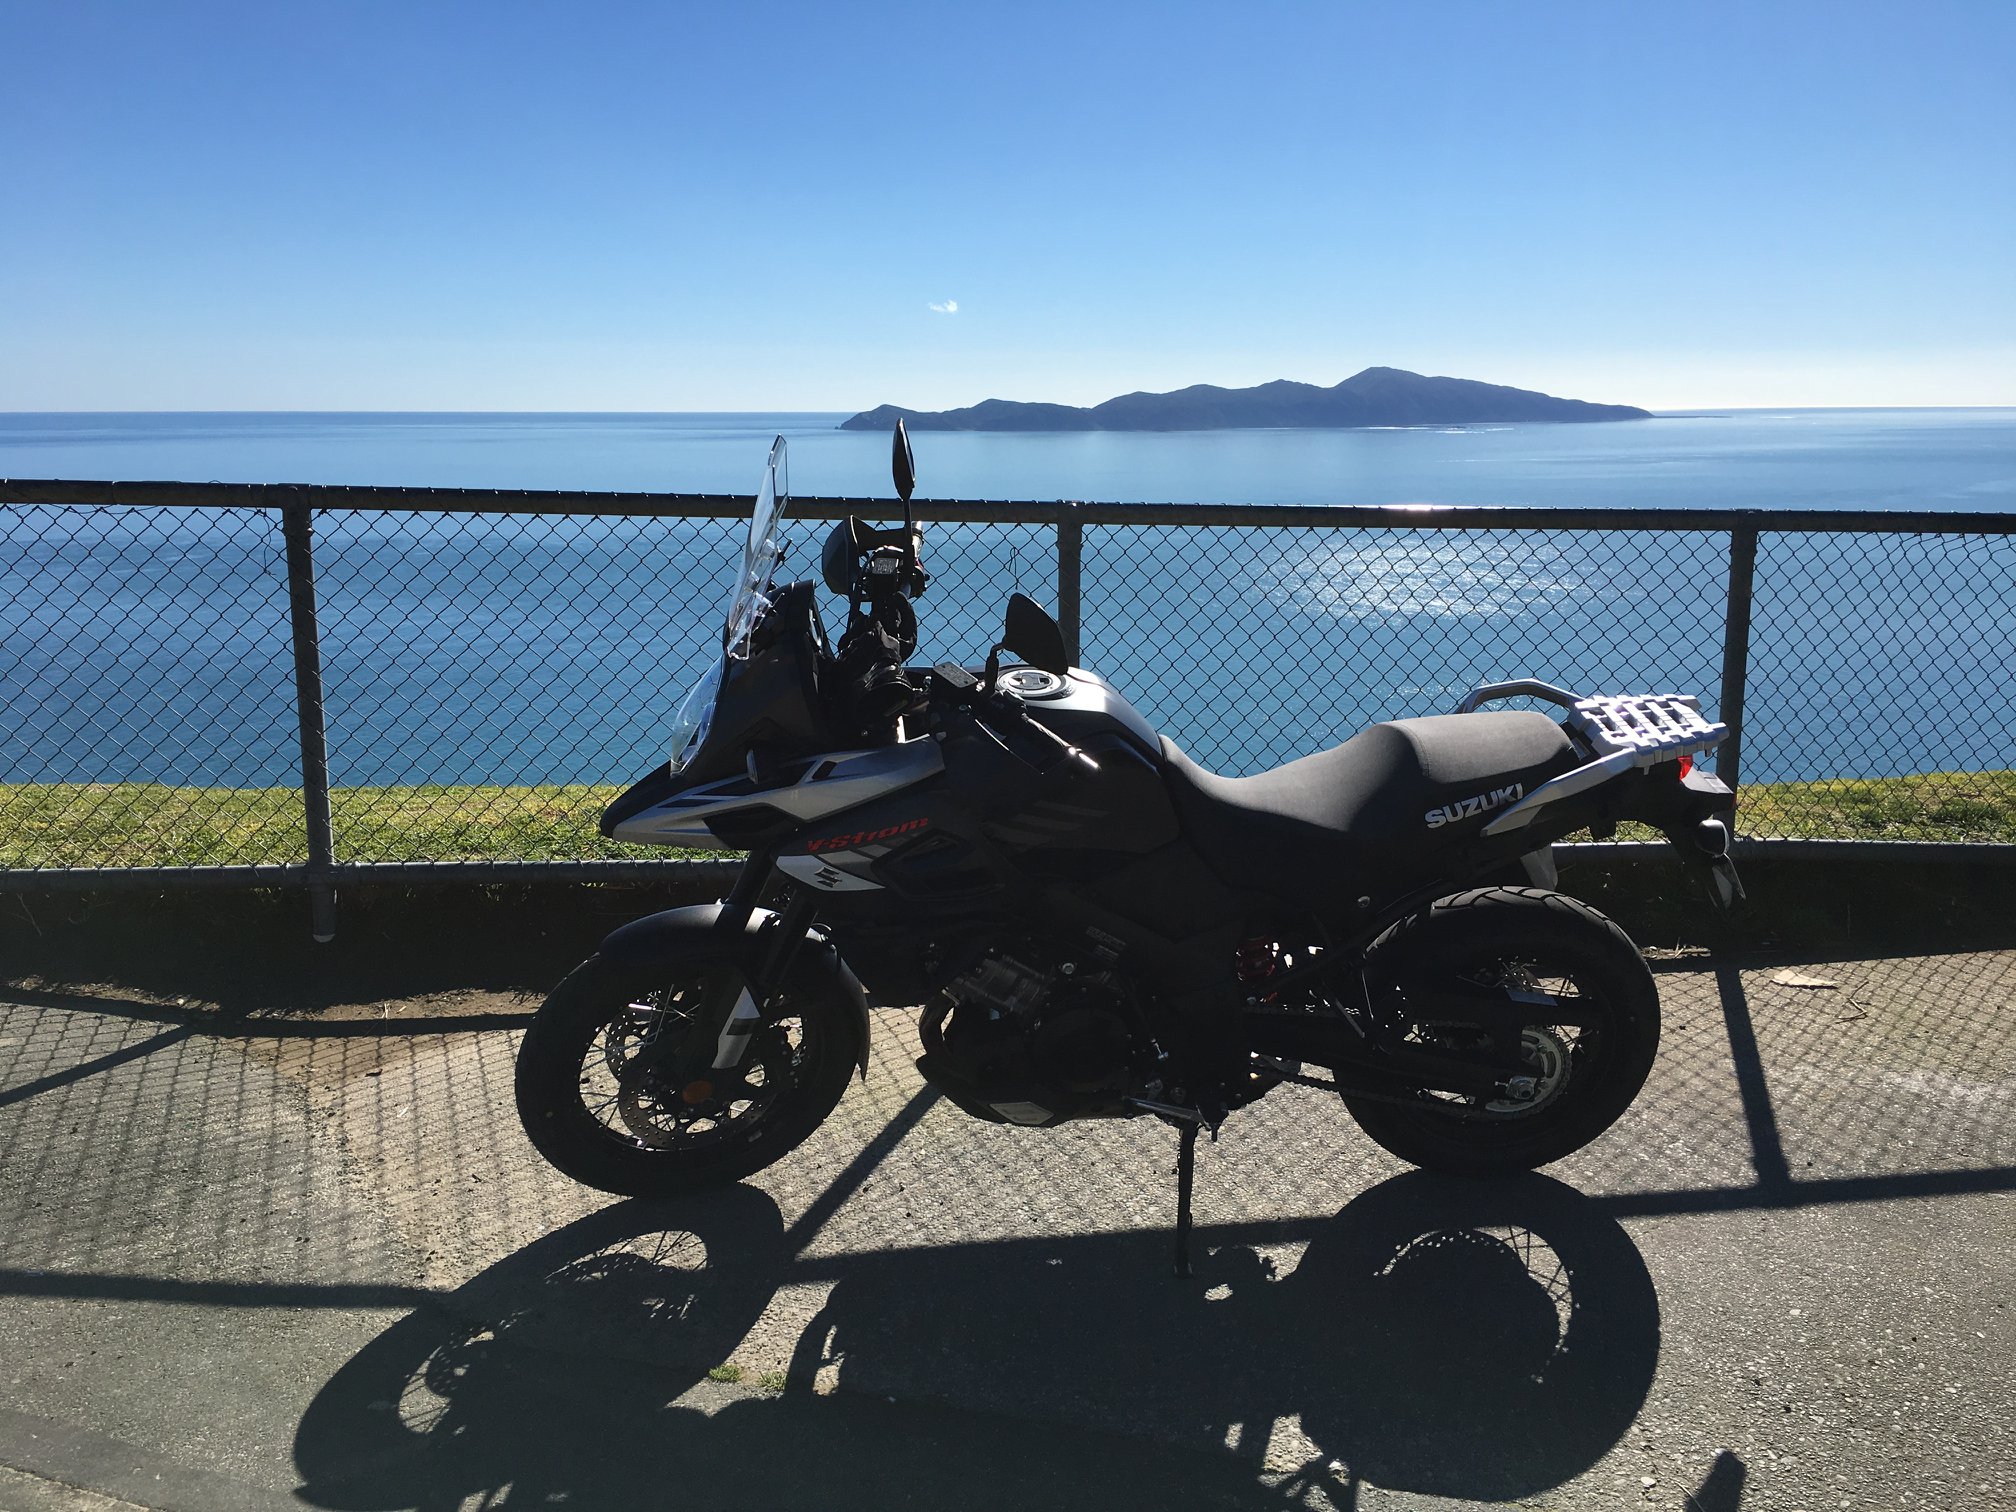 Motorcycle parked in front of water